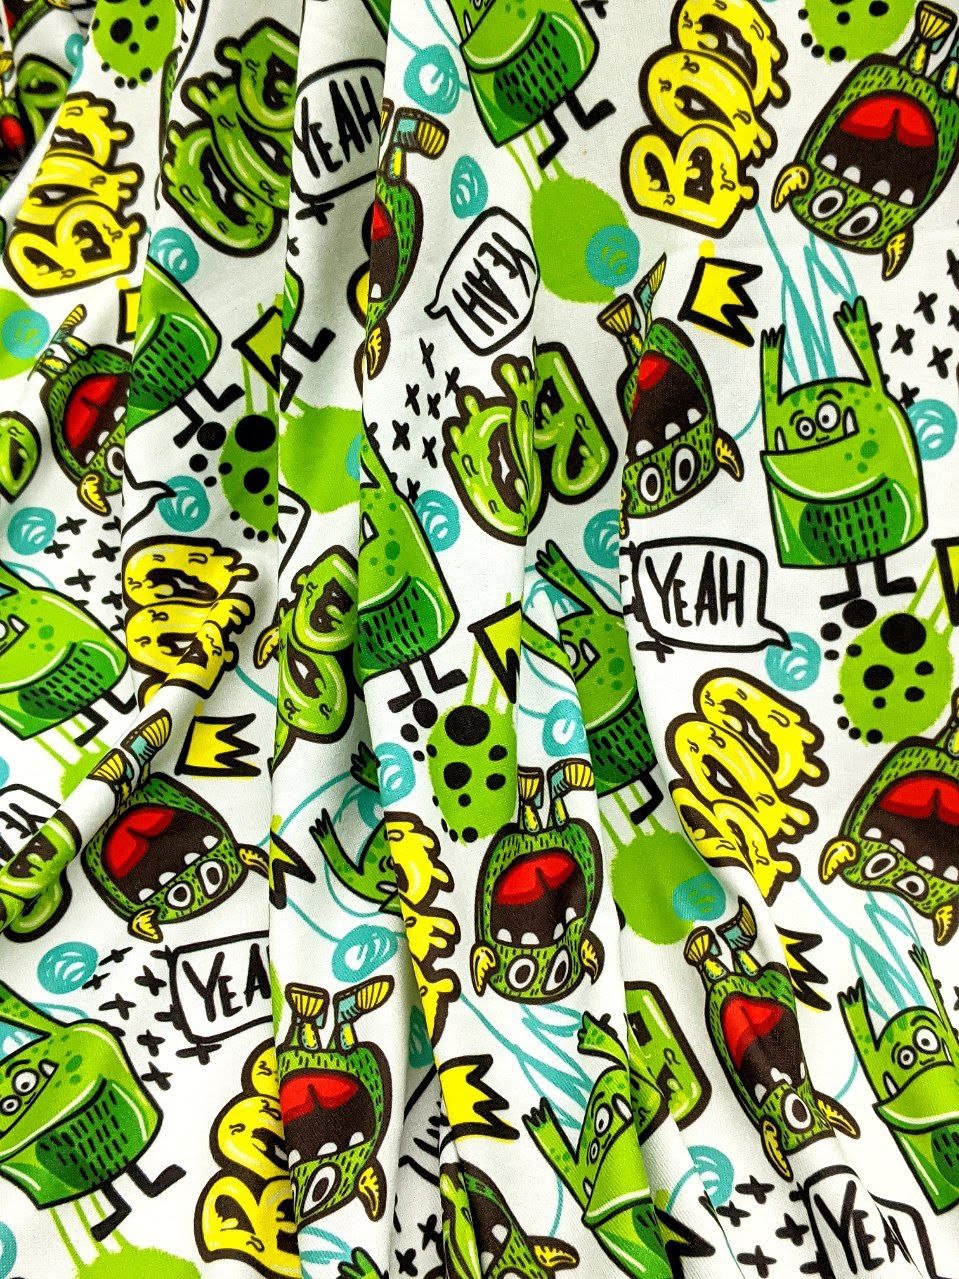 An image of lightweight fabric with a design of green graffiti goblins as an option for dog pajamas